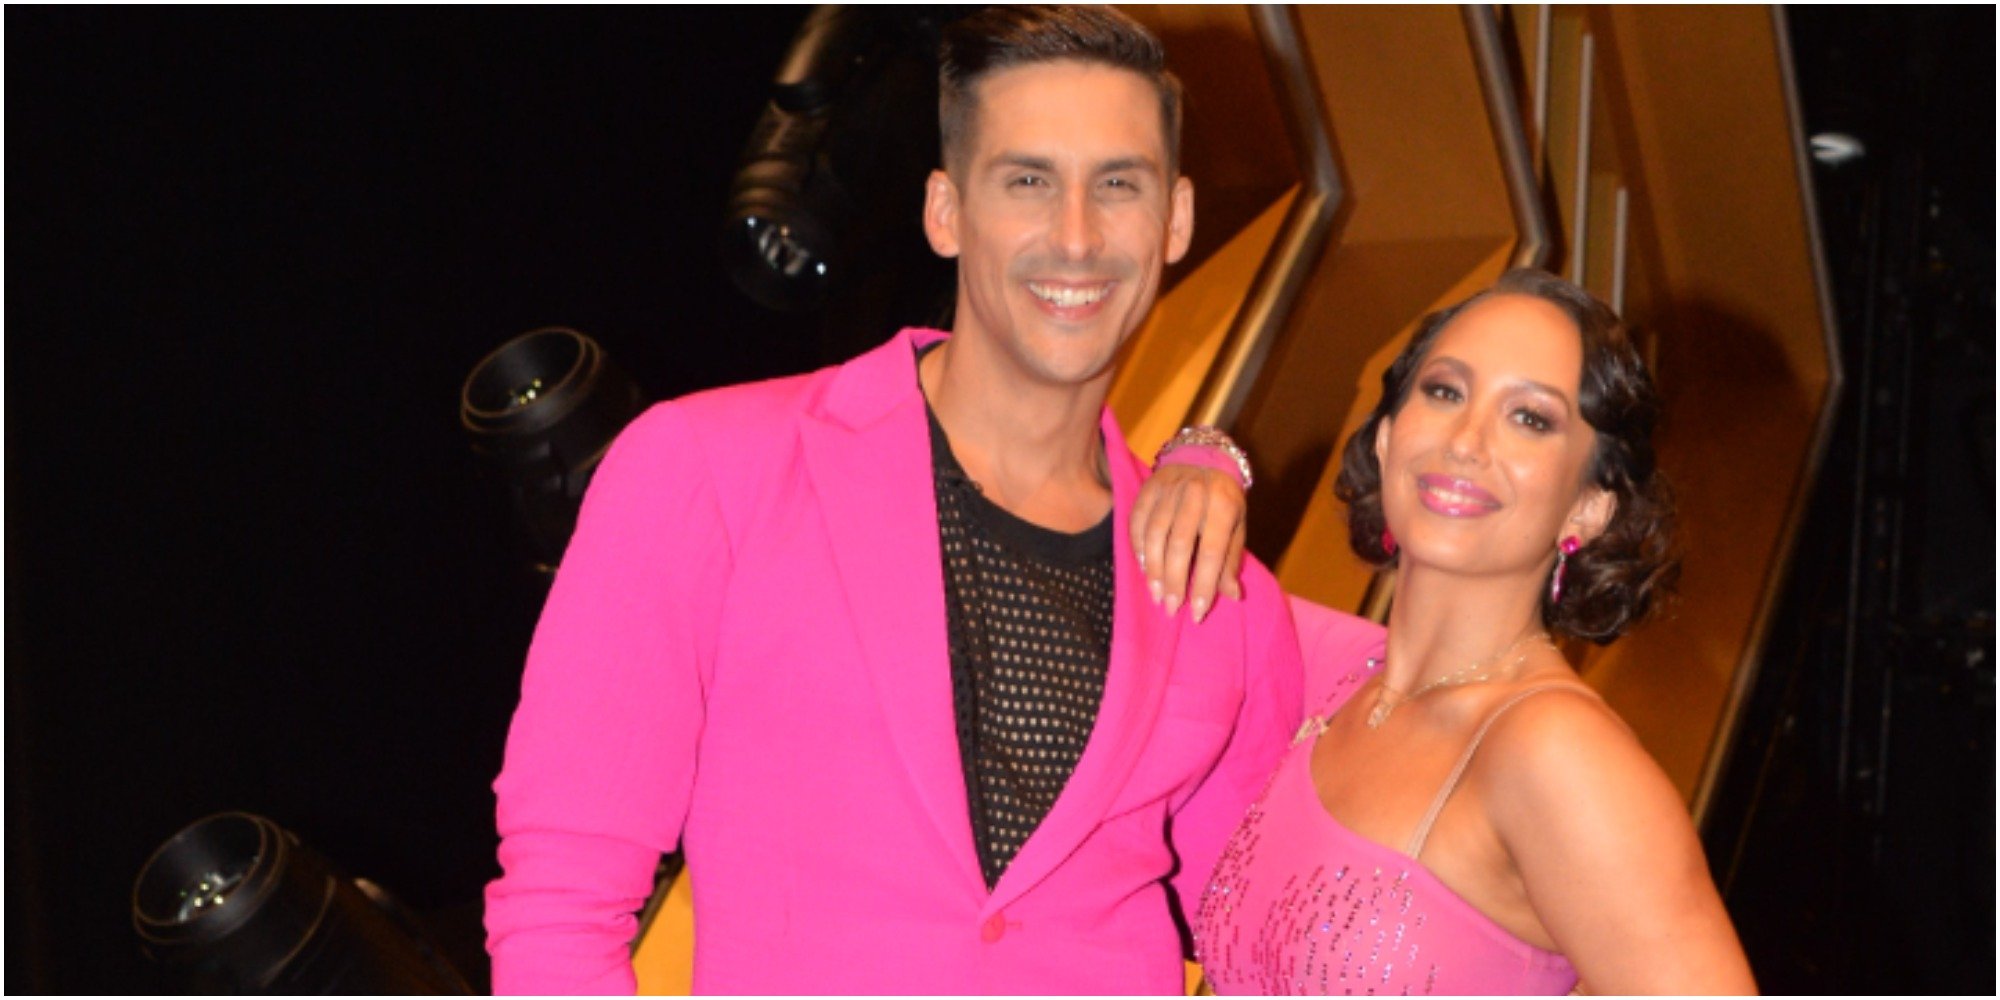 Cheryl Burke found sobriety support from celeb partner Cody Rigsby on "Dancing With the Stars."